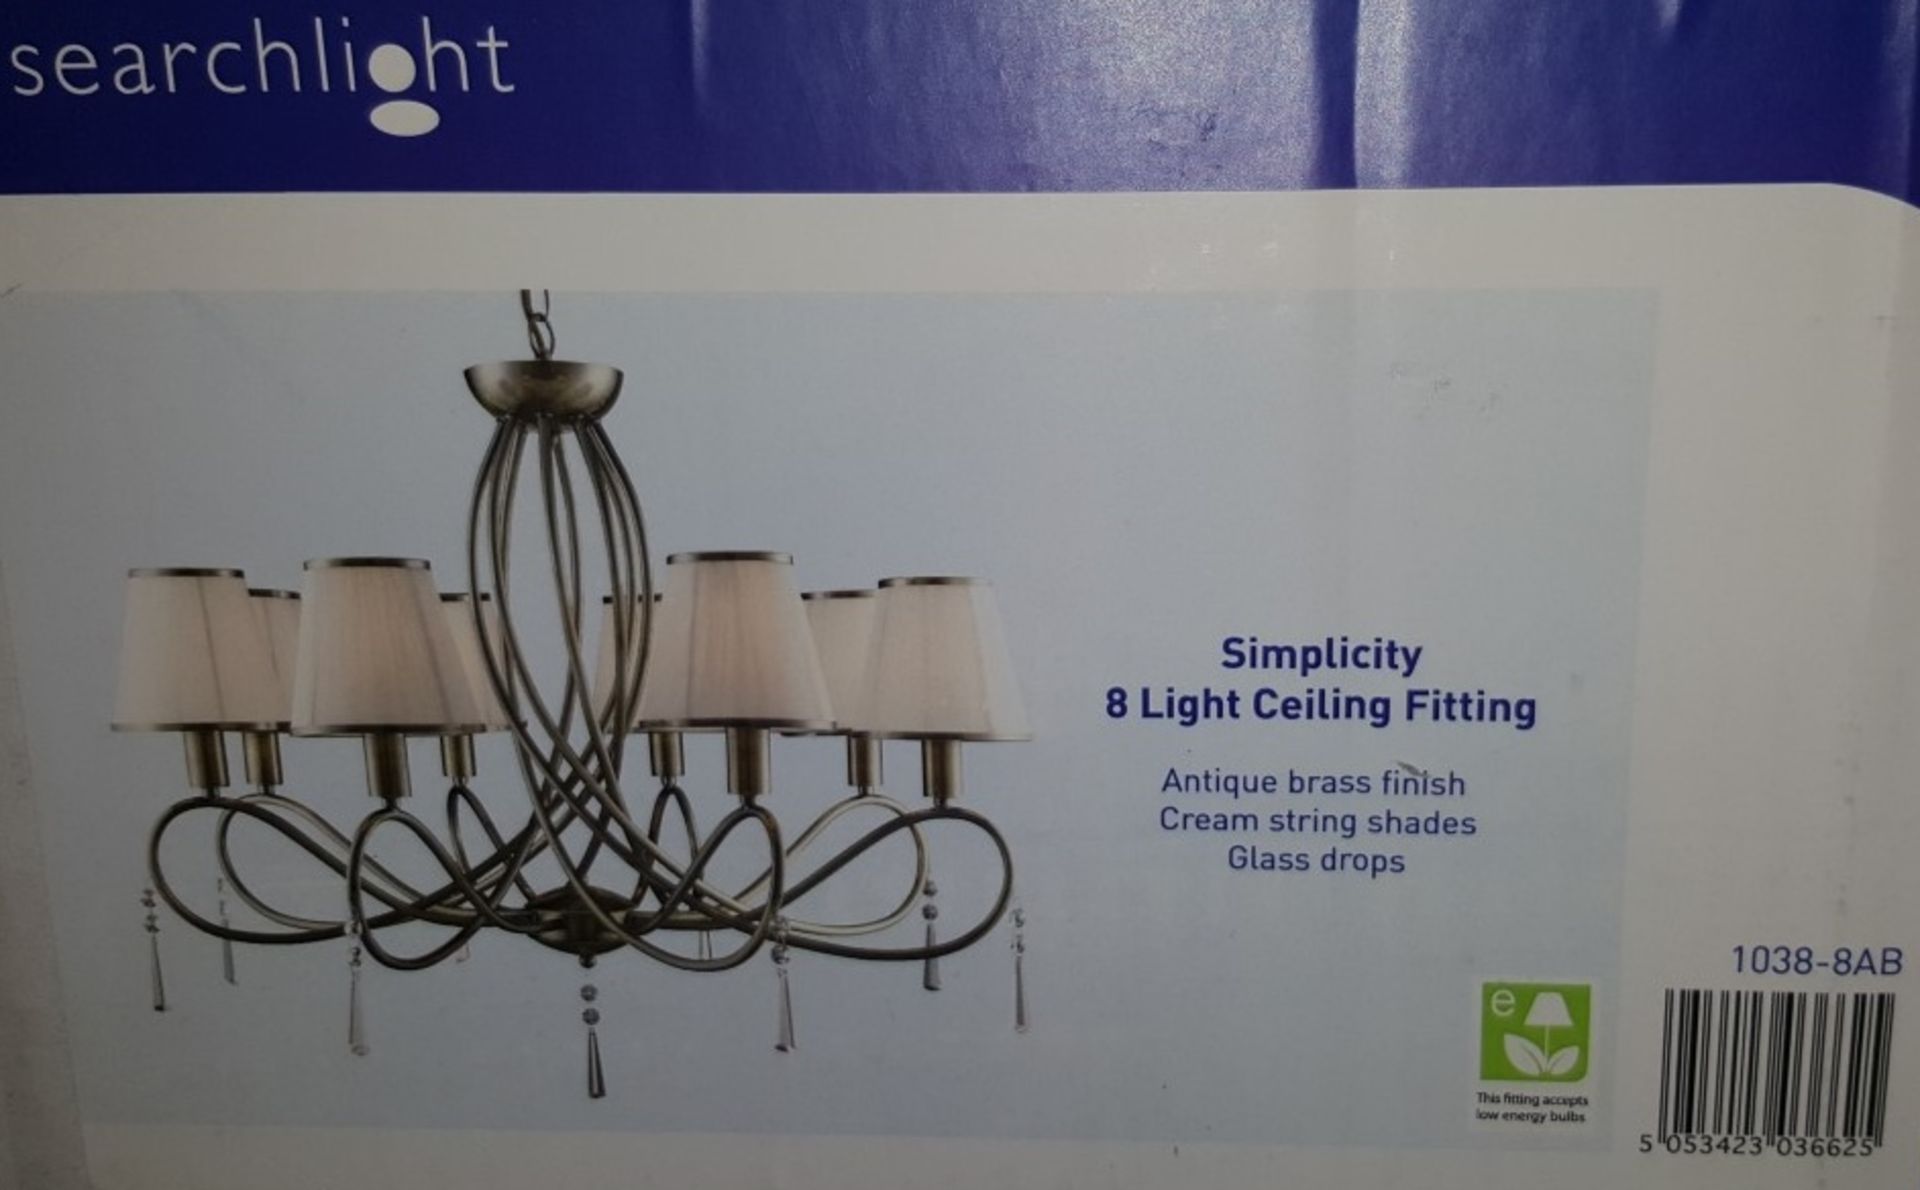 1 x Searchlight Simplicity 8 Light Ceiling Chandelier in Antique Brass - Product Code 1038-8AB - Image 2 of 2